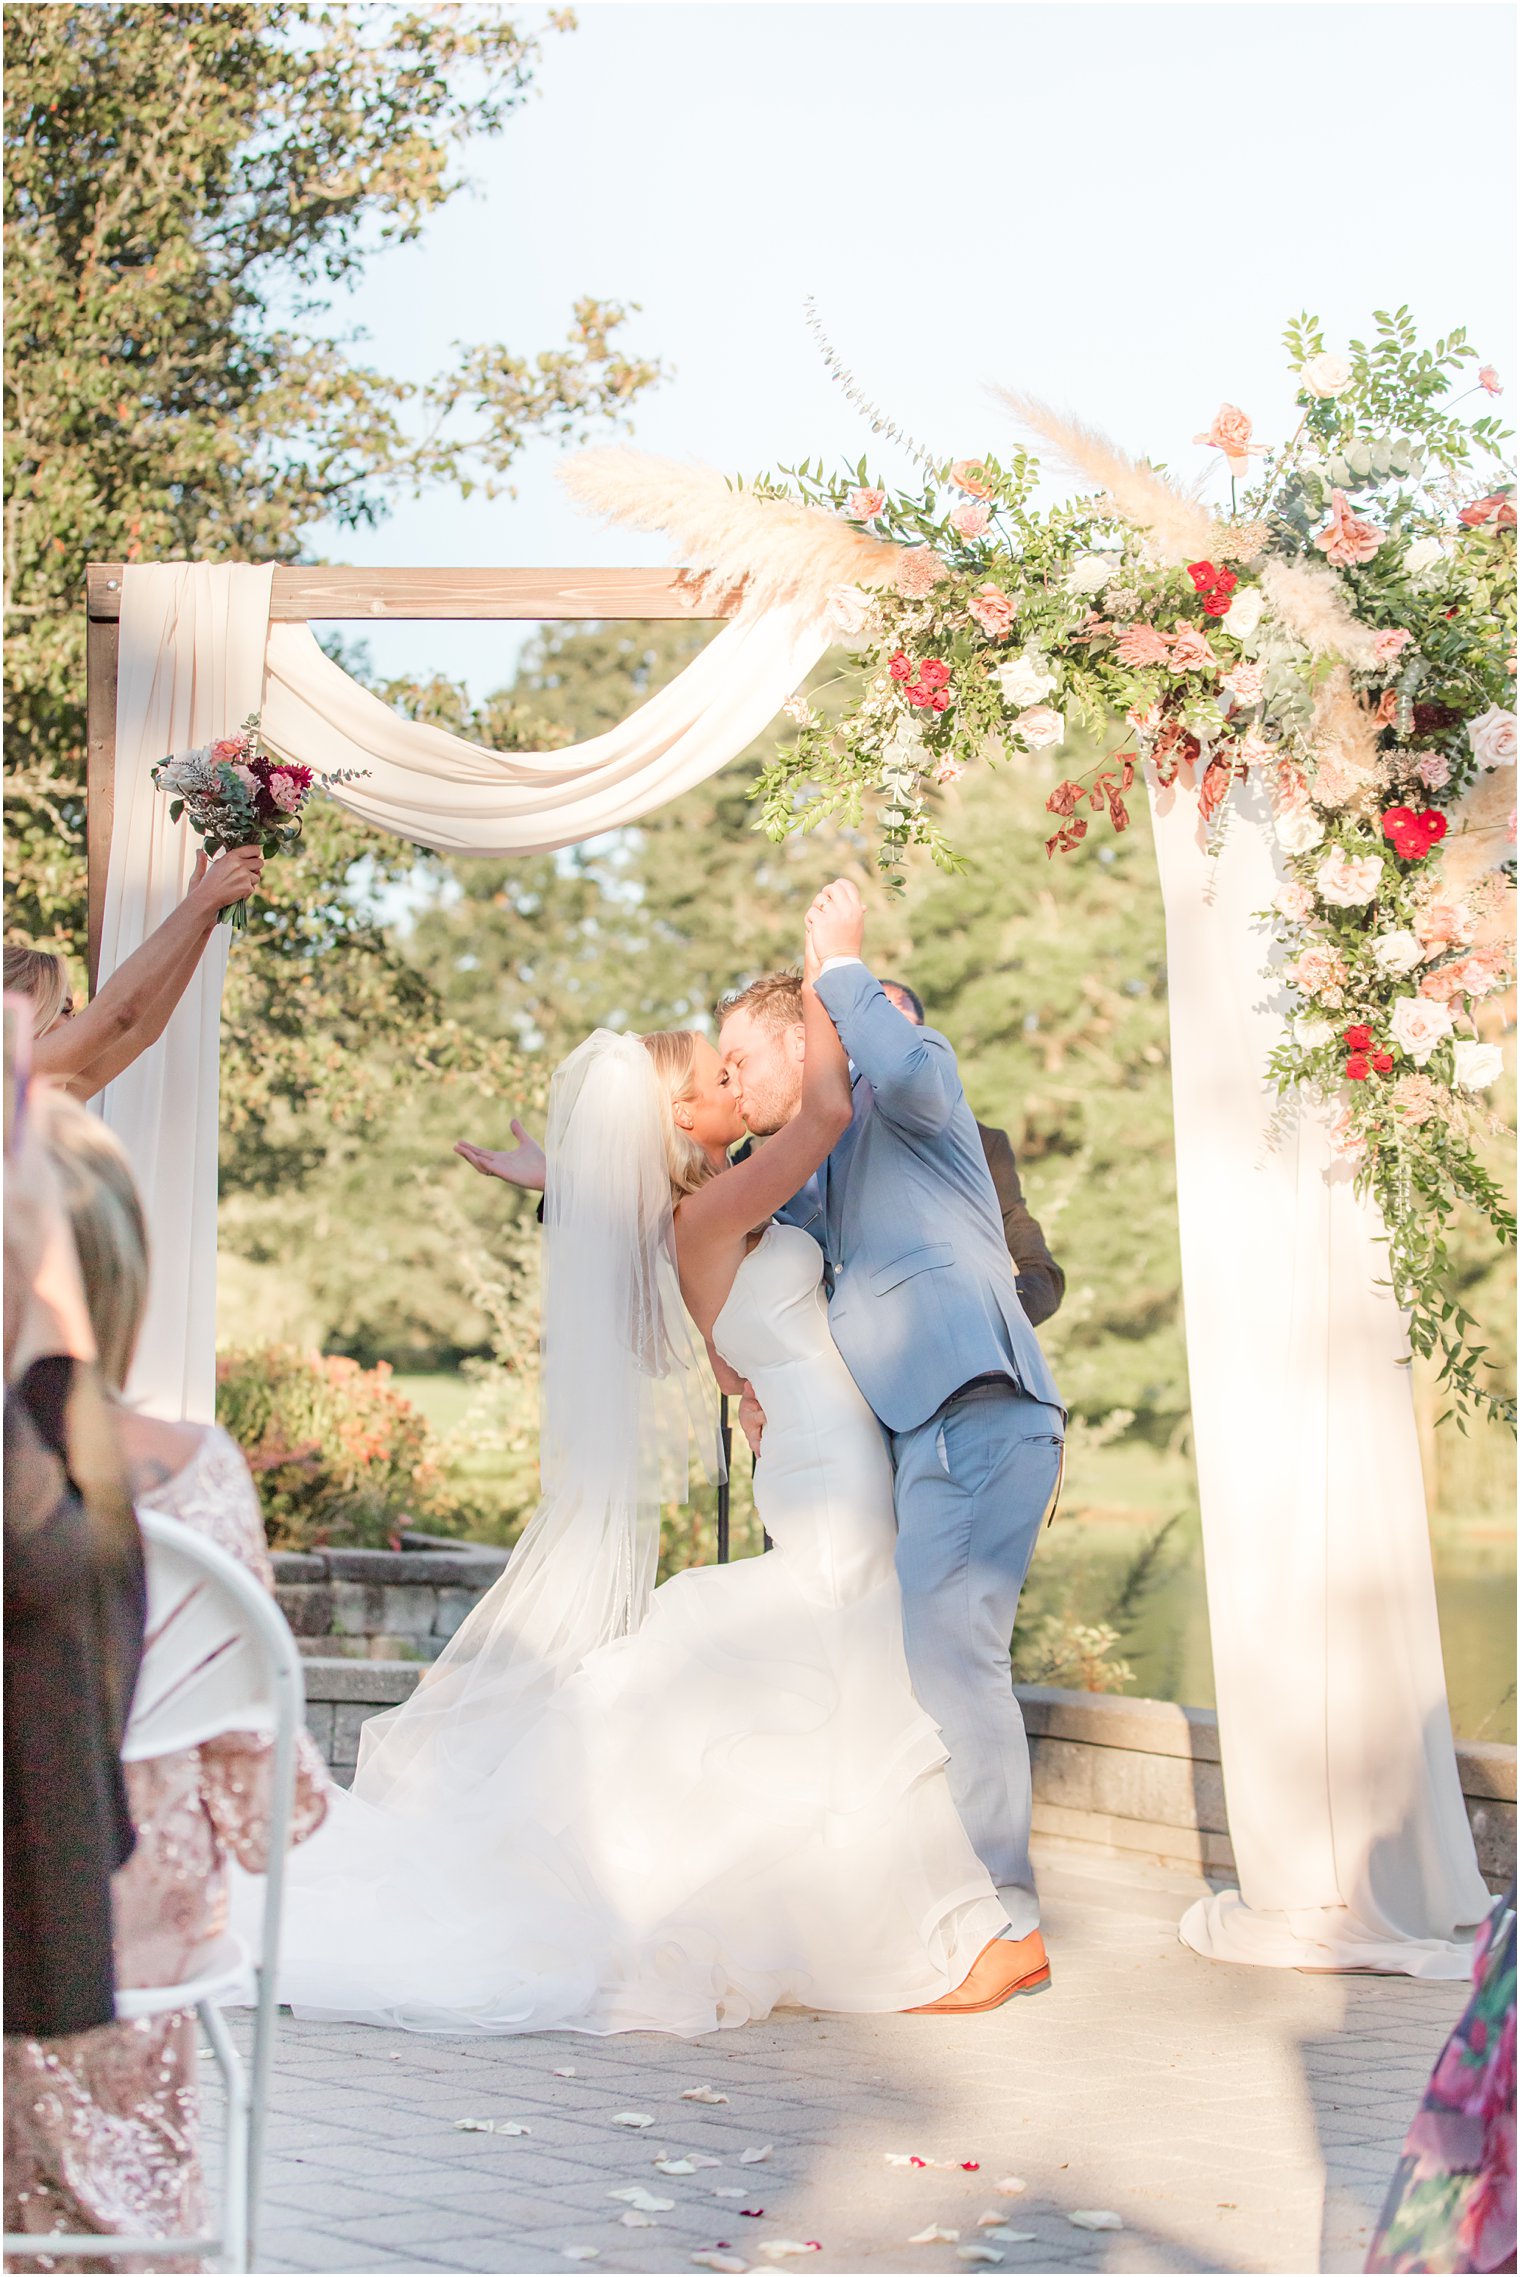 Bride and groom kissing at outdoor ceremony